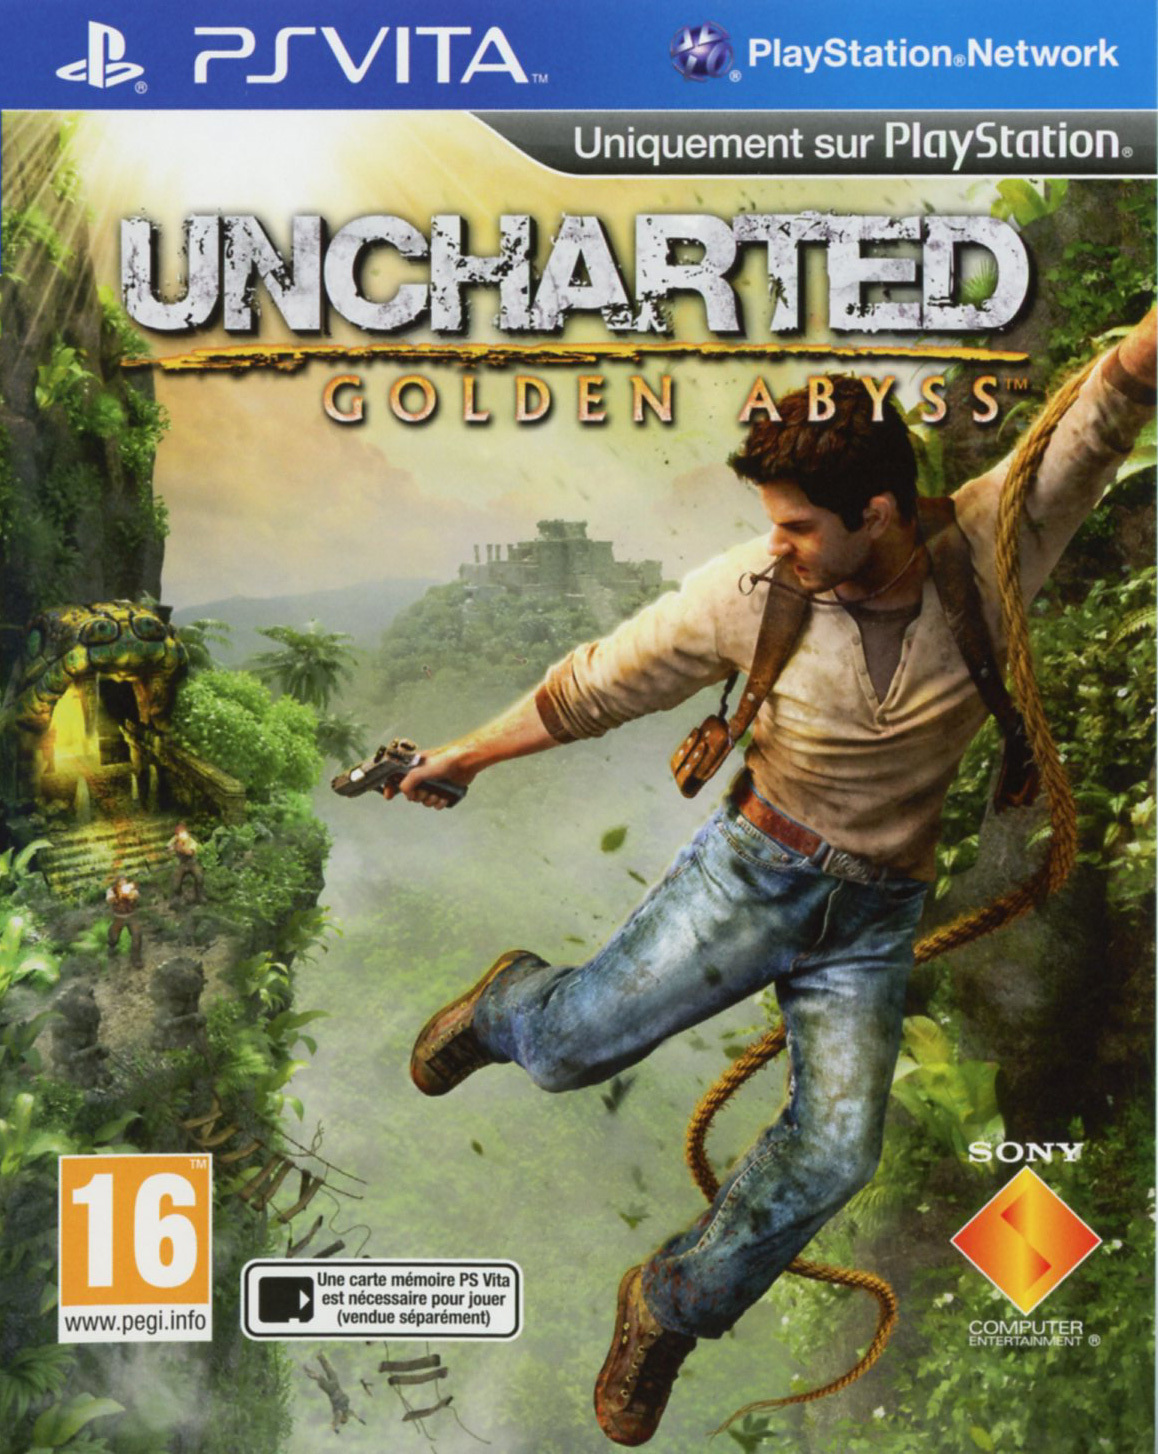 Bote de Uncharted : Golden Abyss